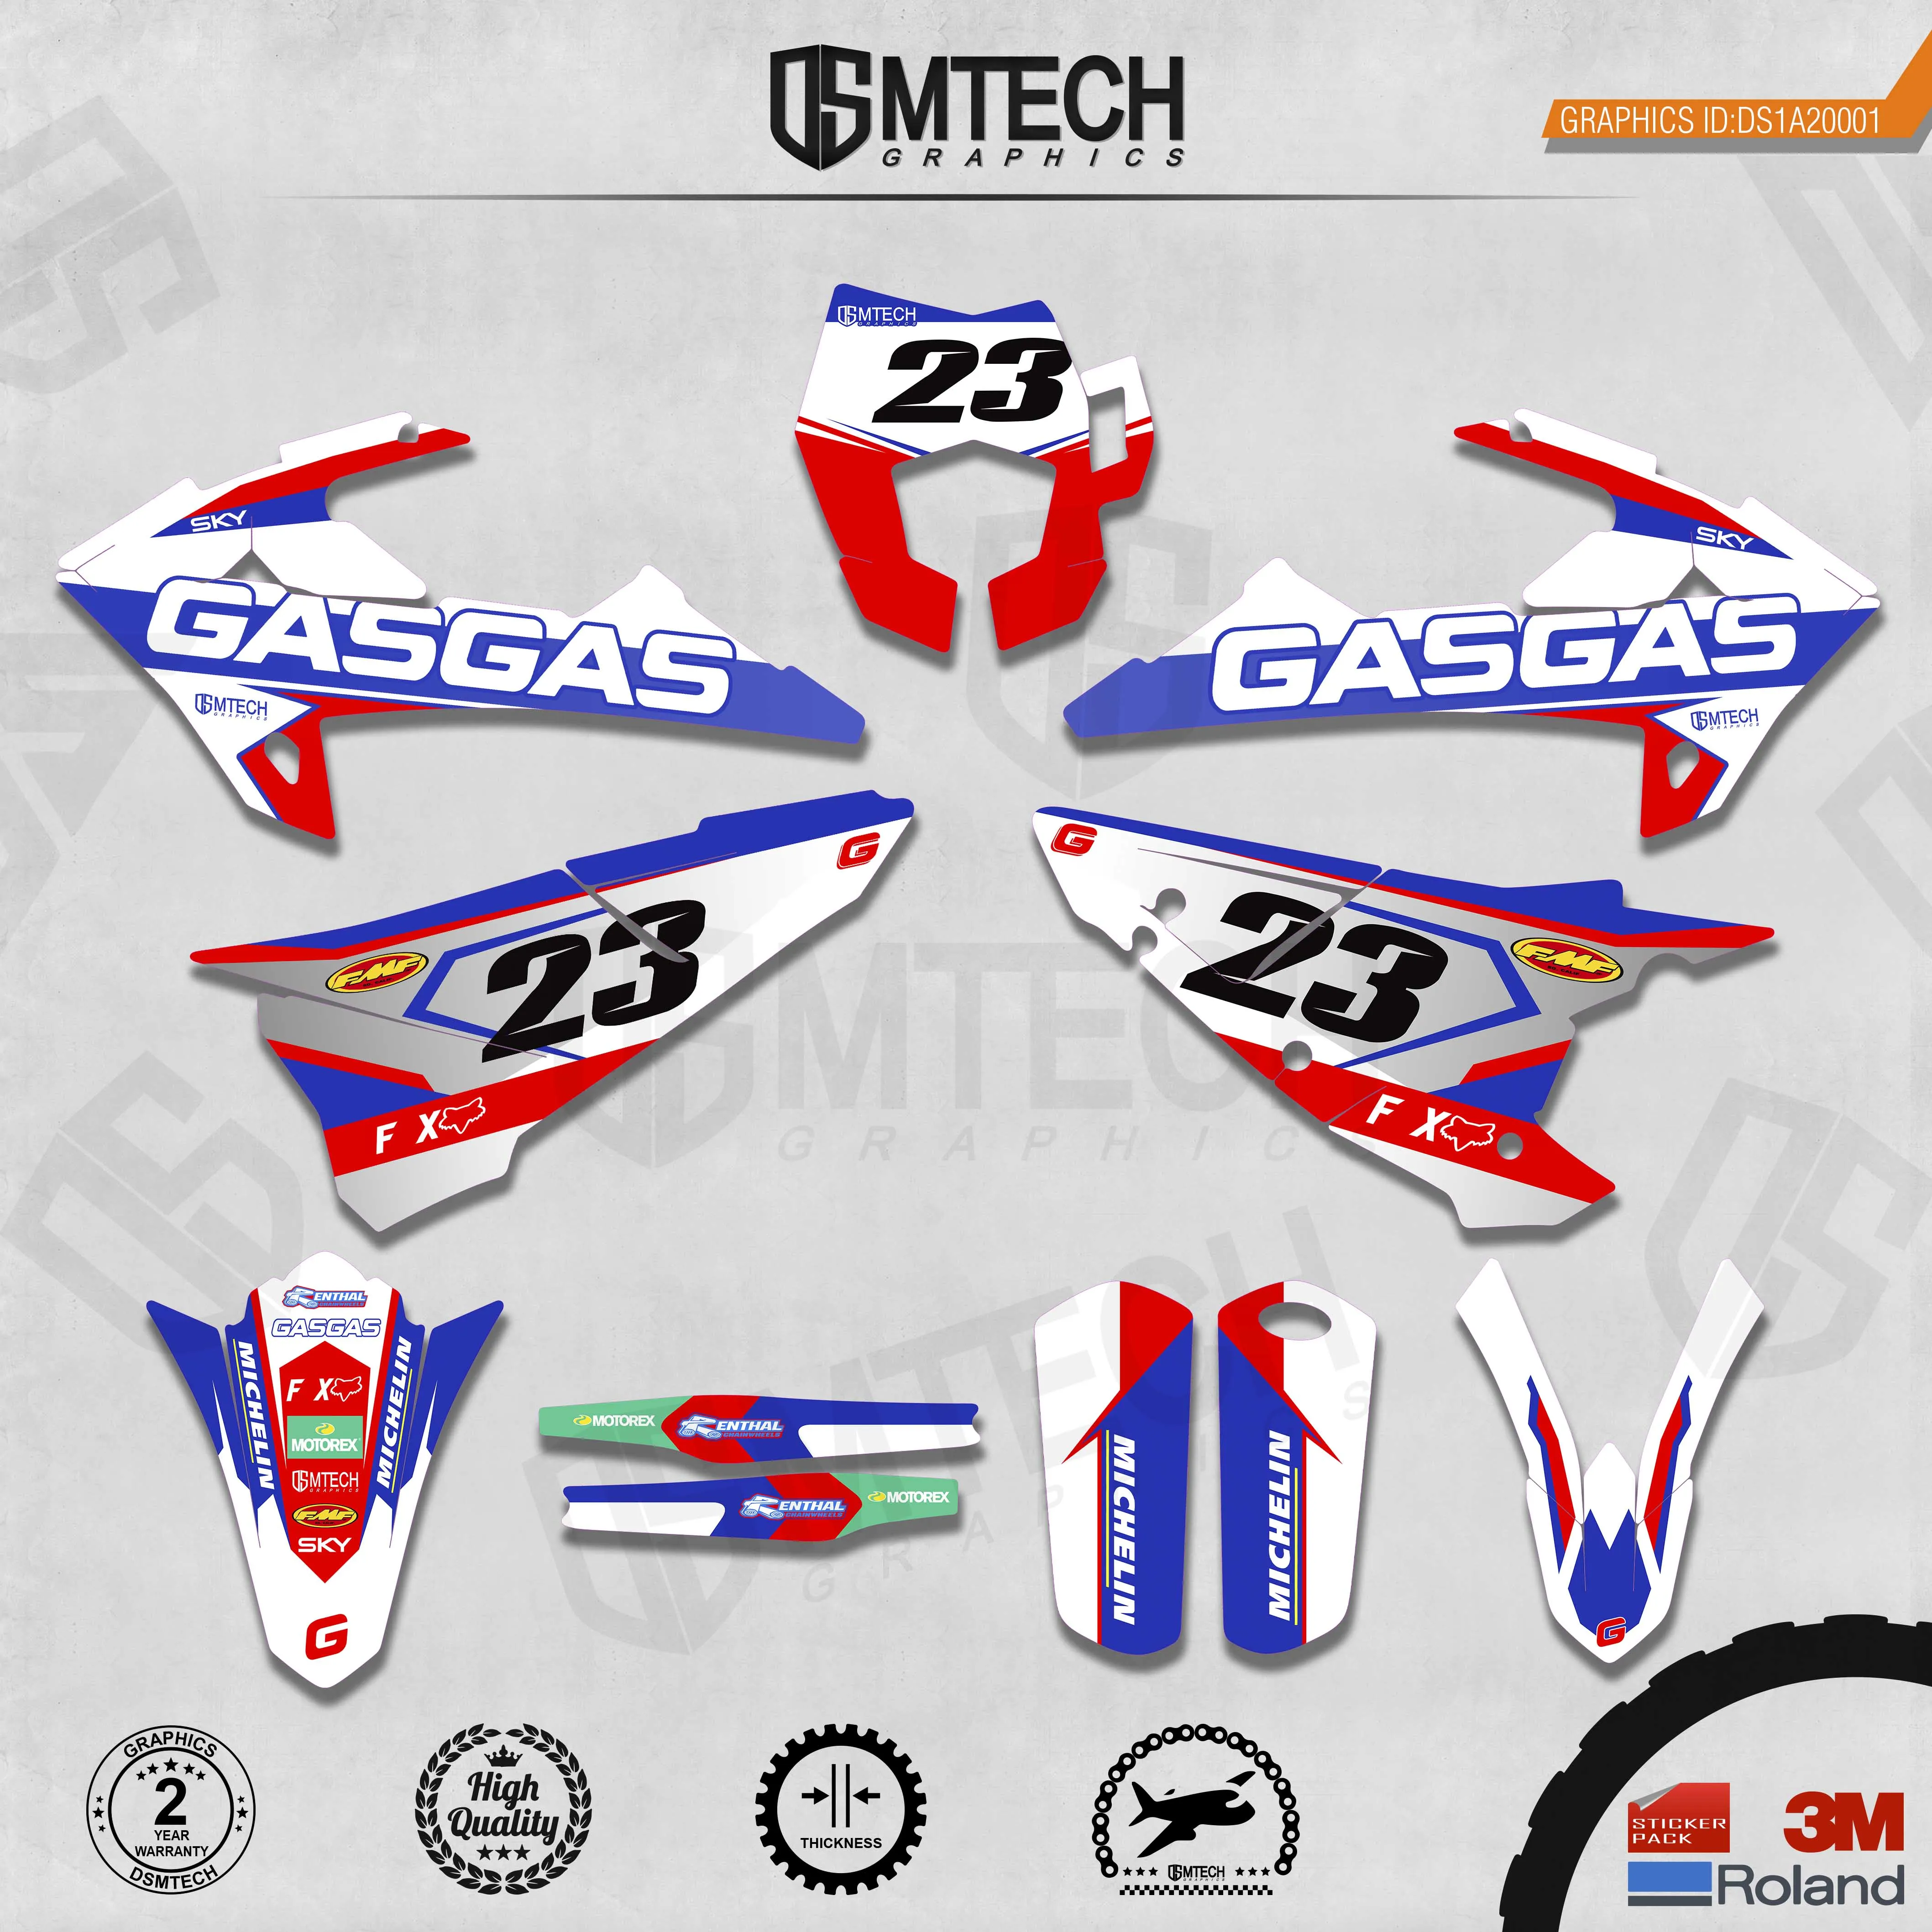 DSMTECH Customized Team Graphics Backgrounds Decals 3M Custom Stickers For  GASGAS 2018 2019 2020  EC 001